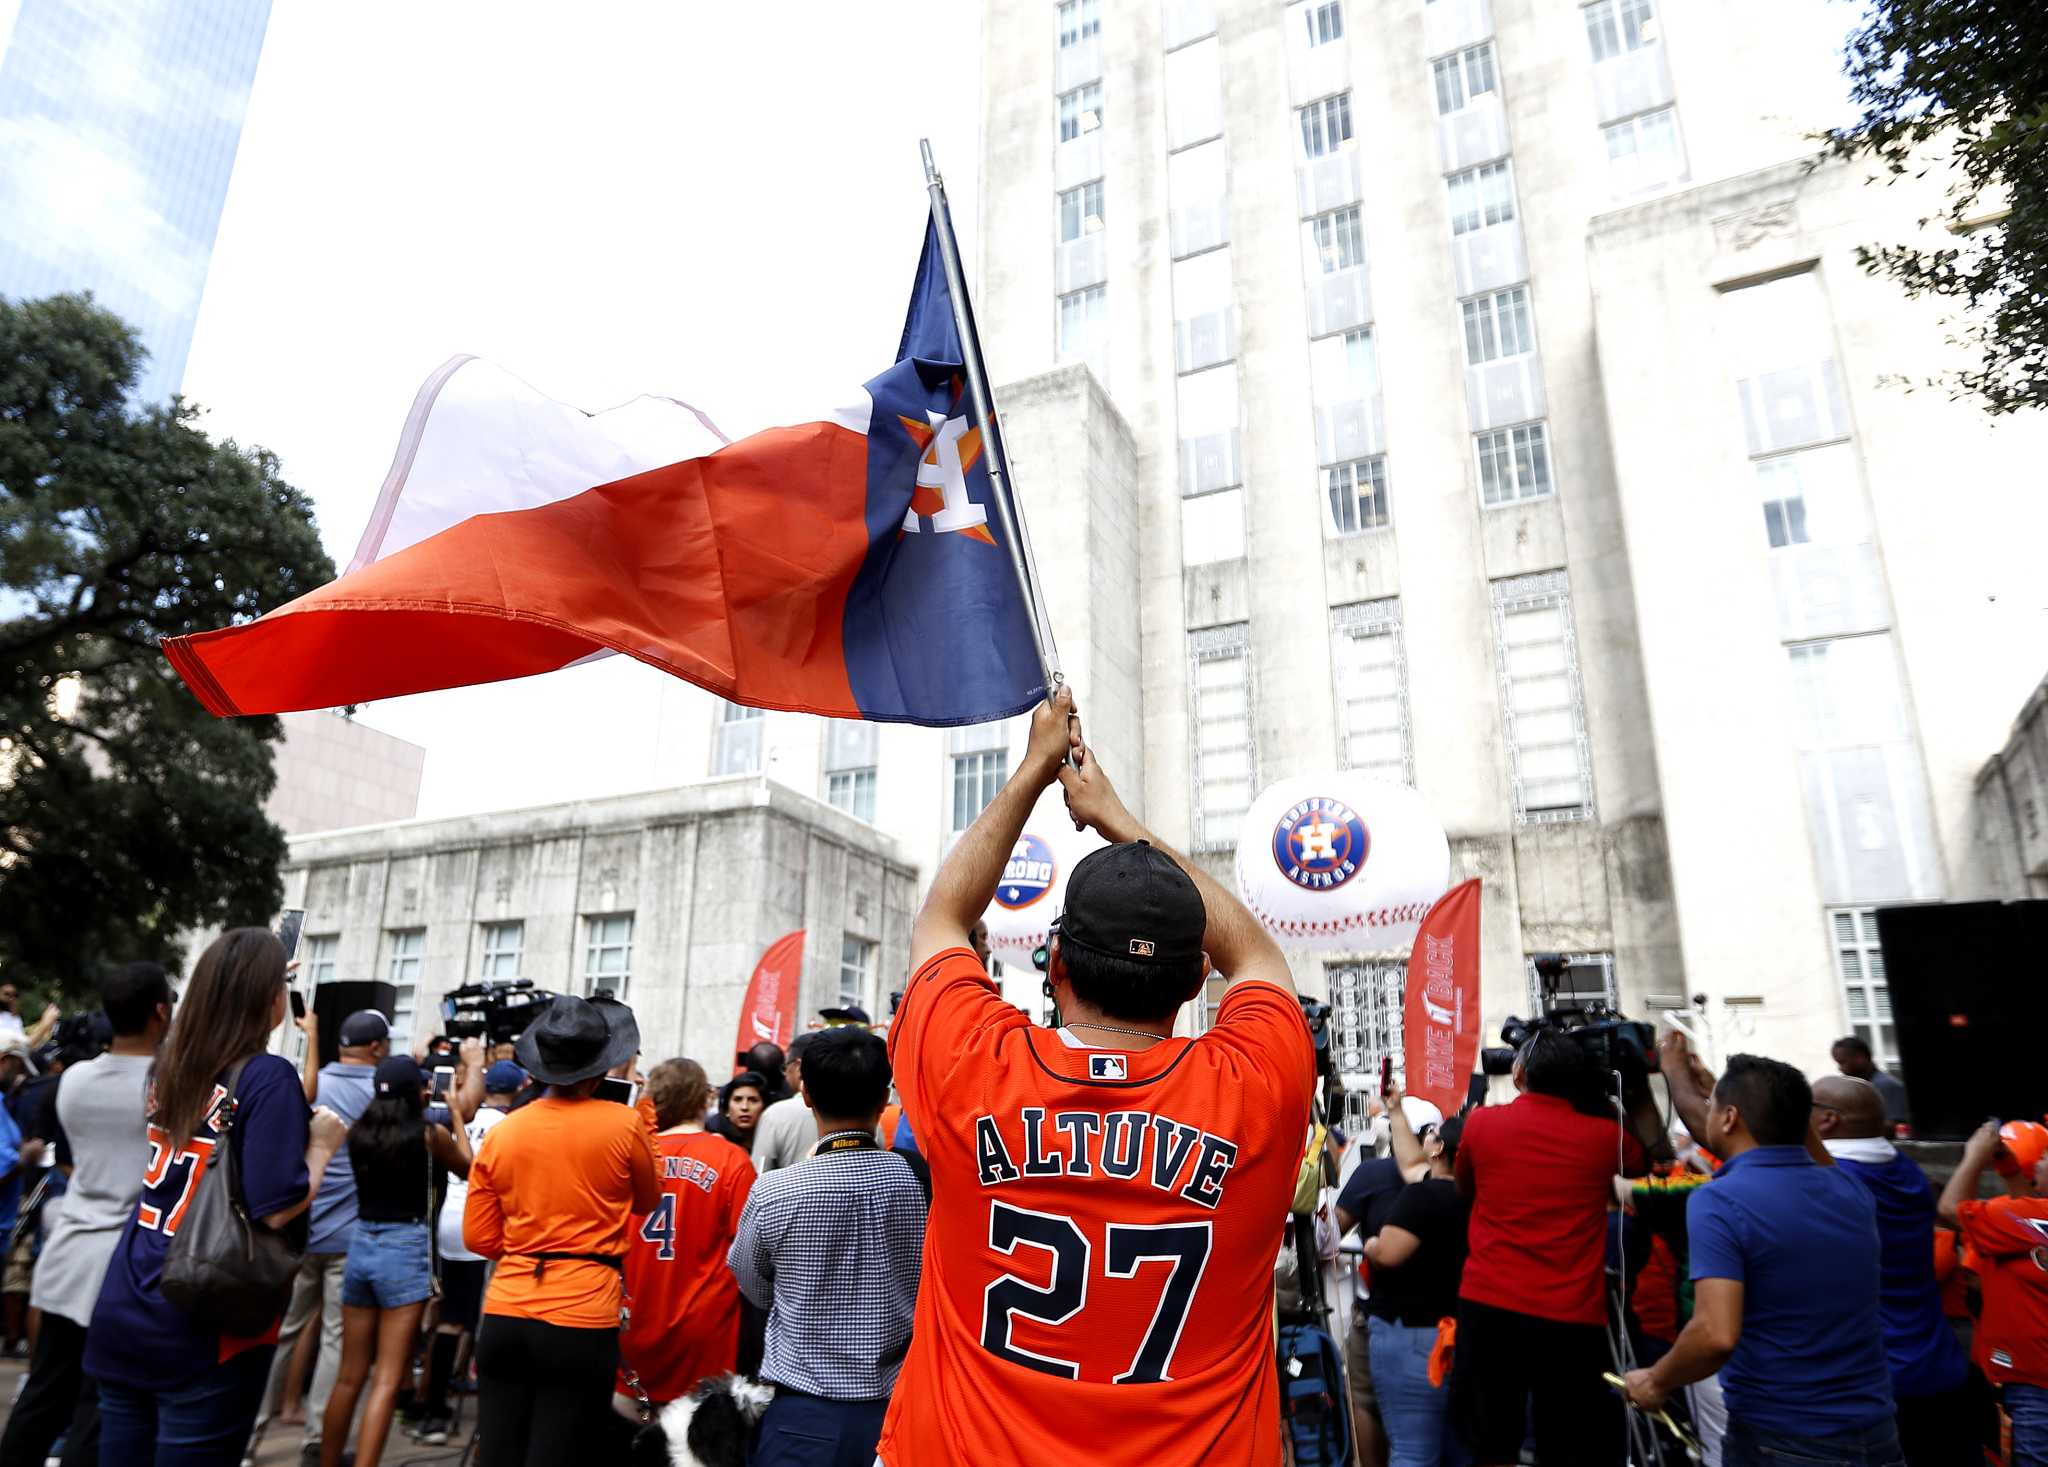 Katy ISD on X: Congratulations to the Houston @astros from Katy ISD! To  celebrate their World Series Championship win, all Katy ISD students and  staff are encouraged to wear their Astros gear/colors